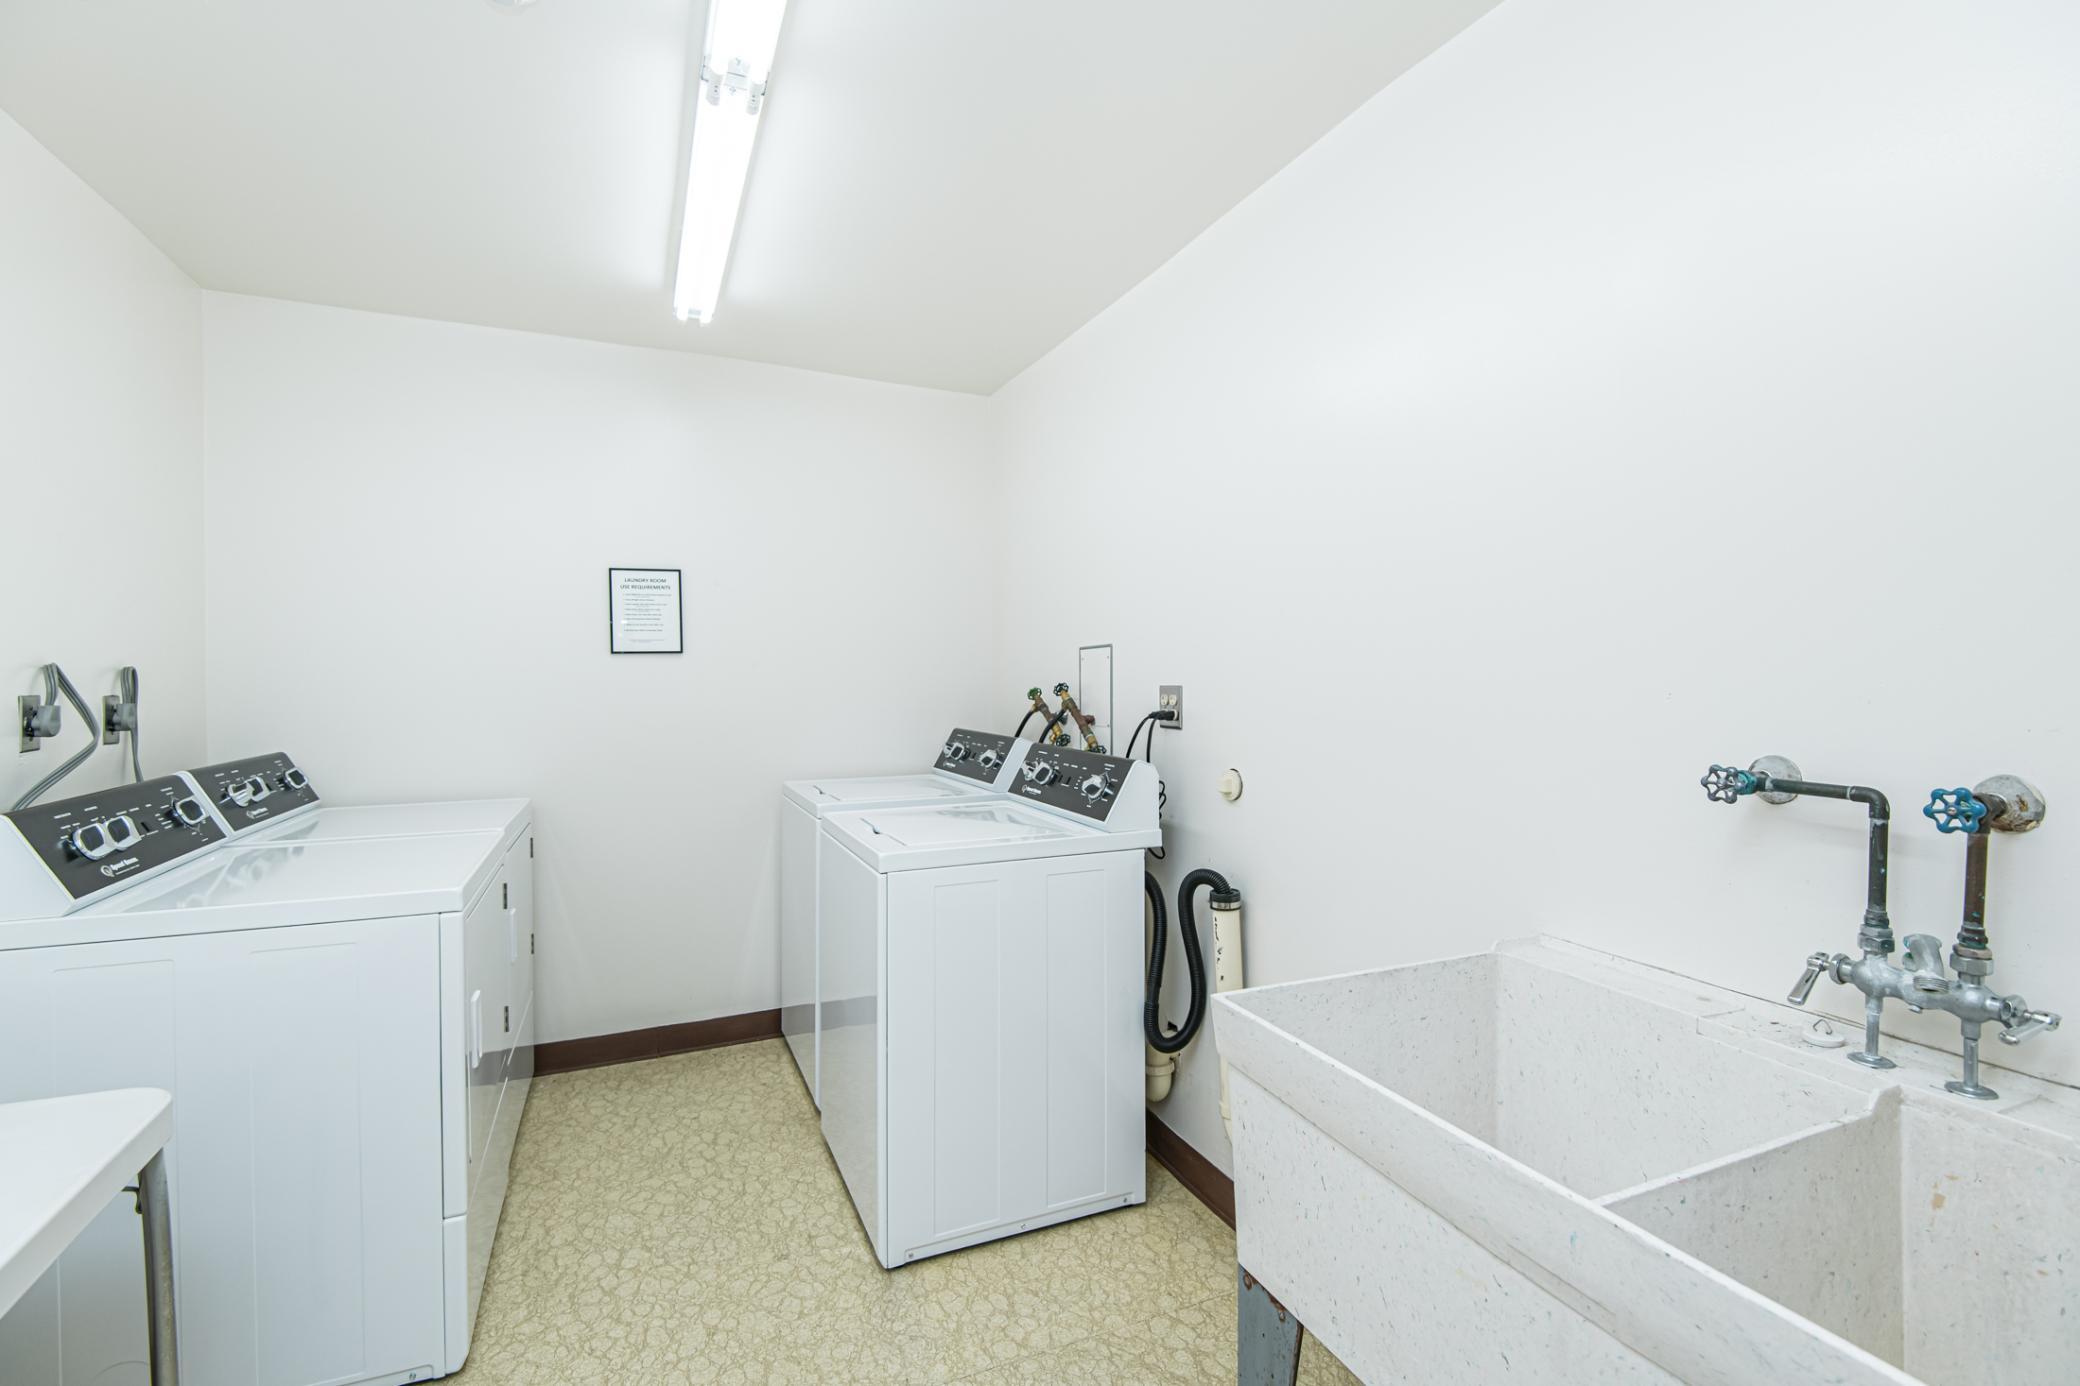 Shared laundry room (free) plus laundry tubs.